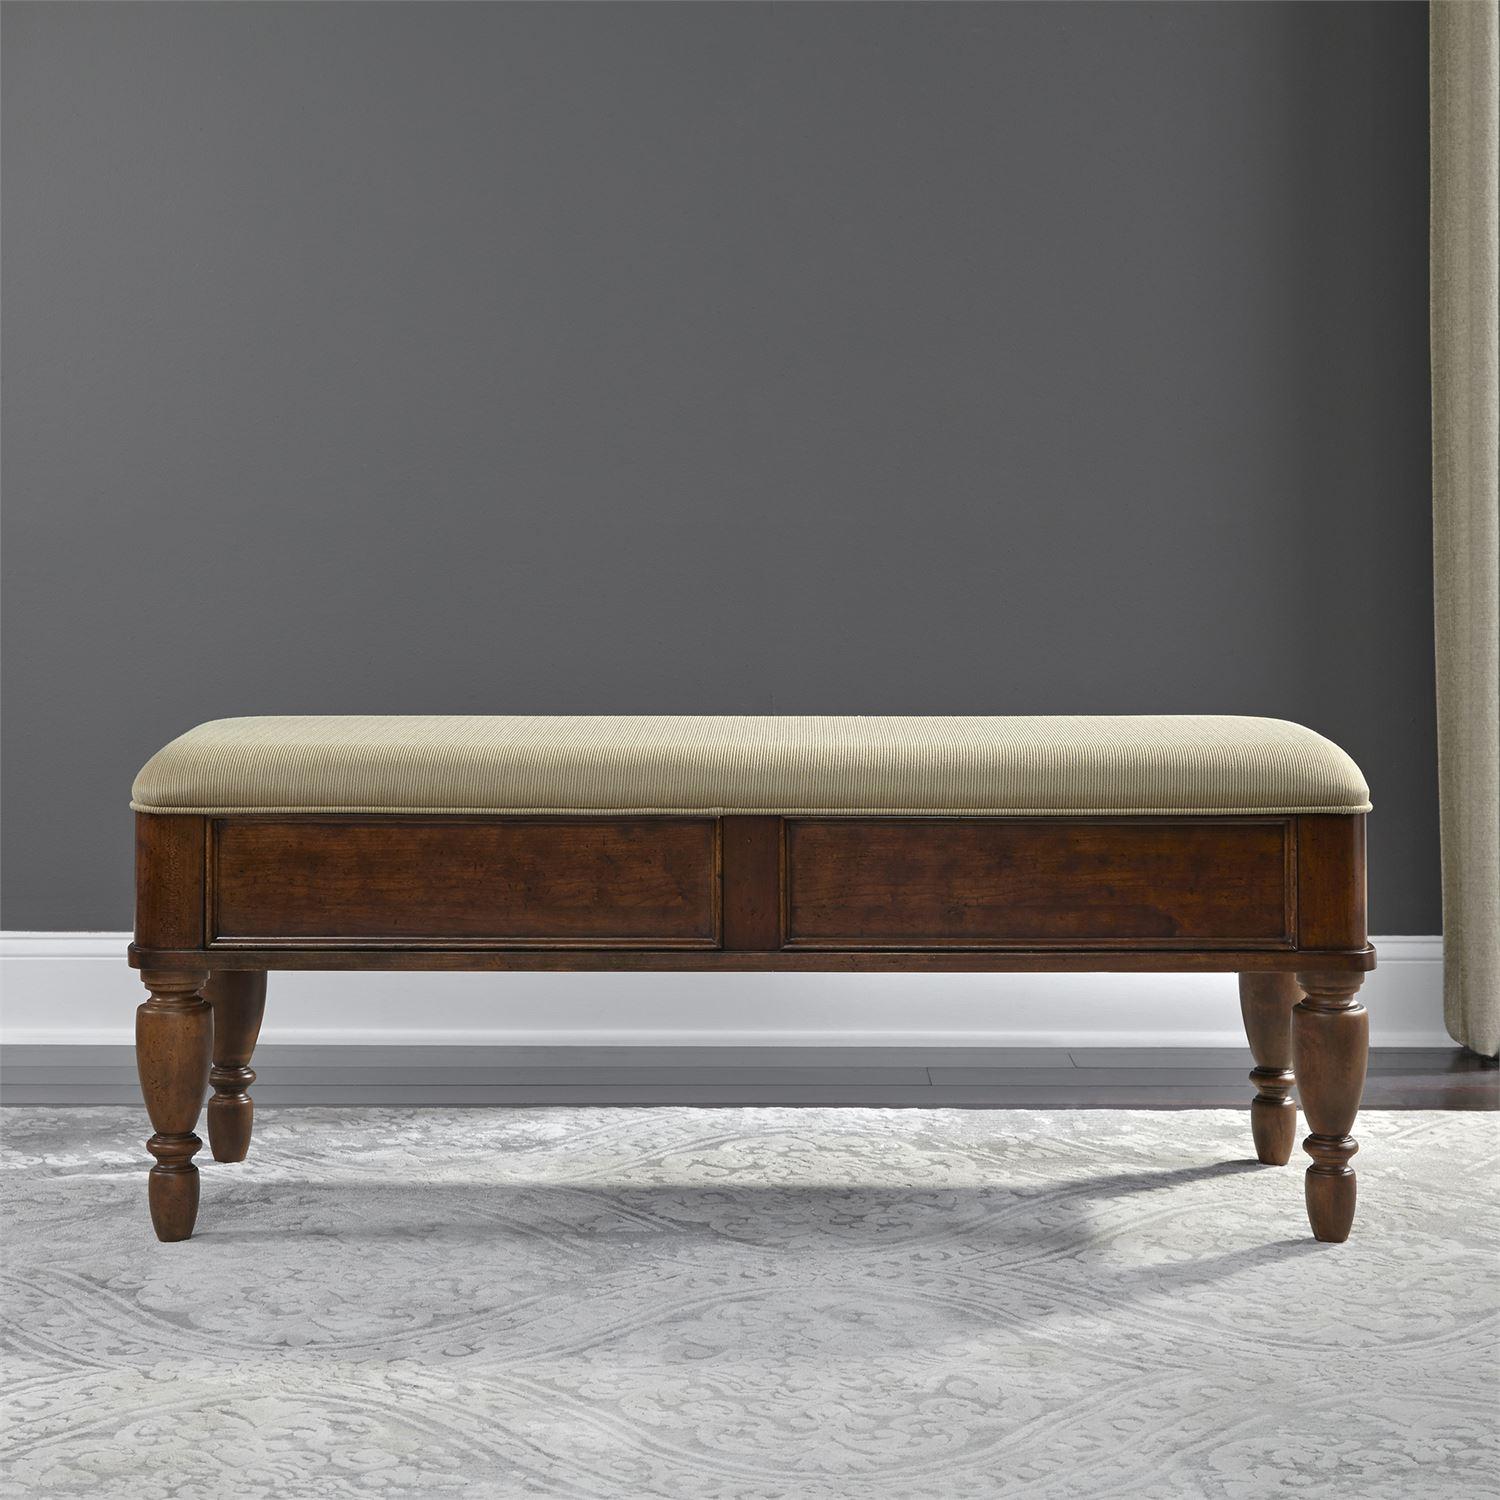 Traditional Bench Rustic Traditions  (589-BR) Bench 589-BR47 in Brown 